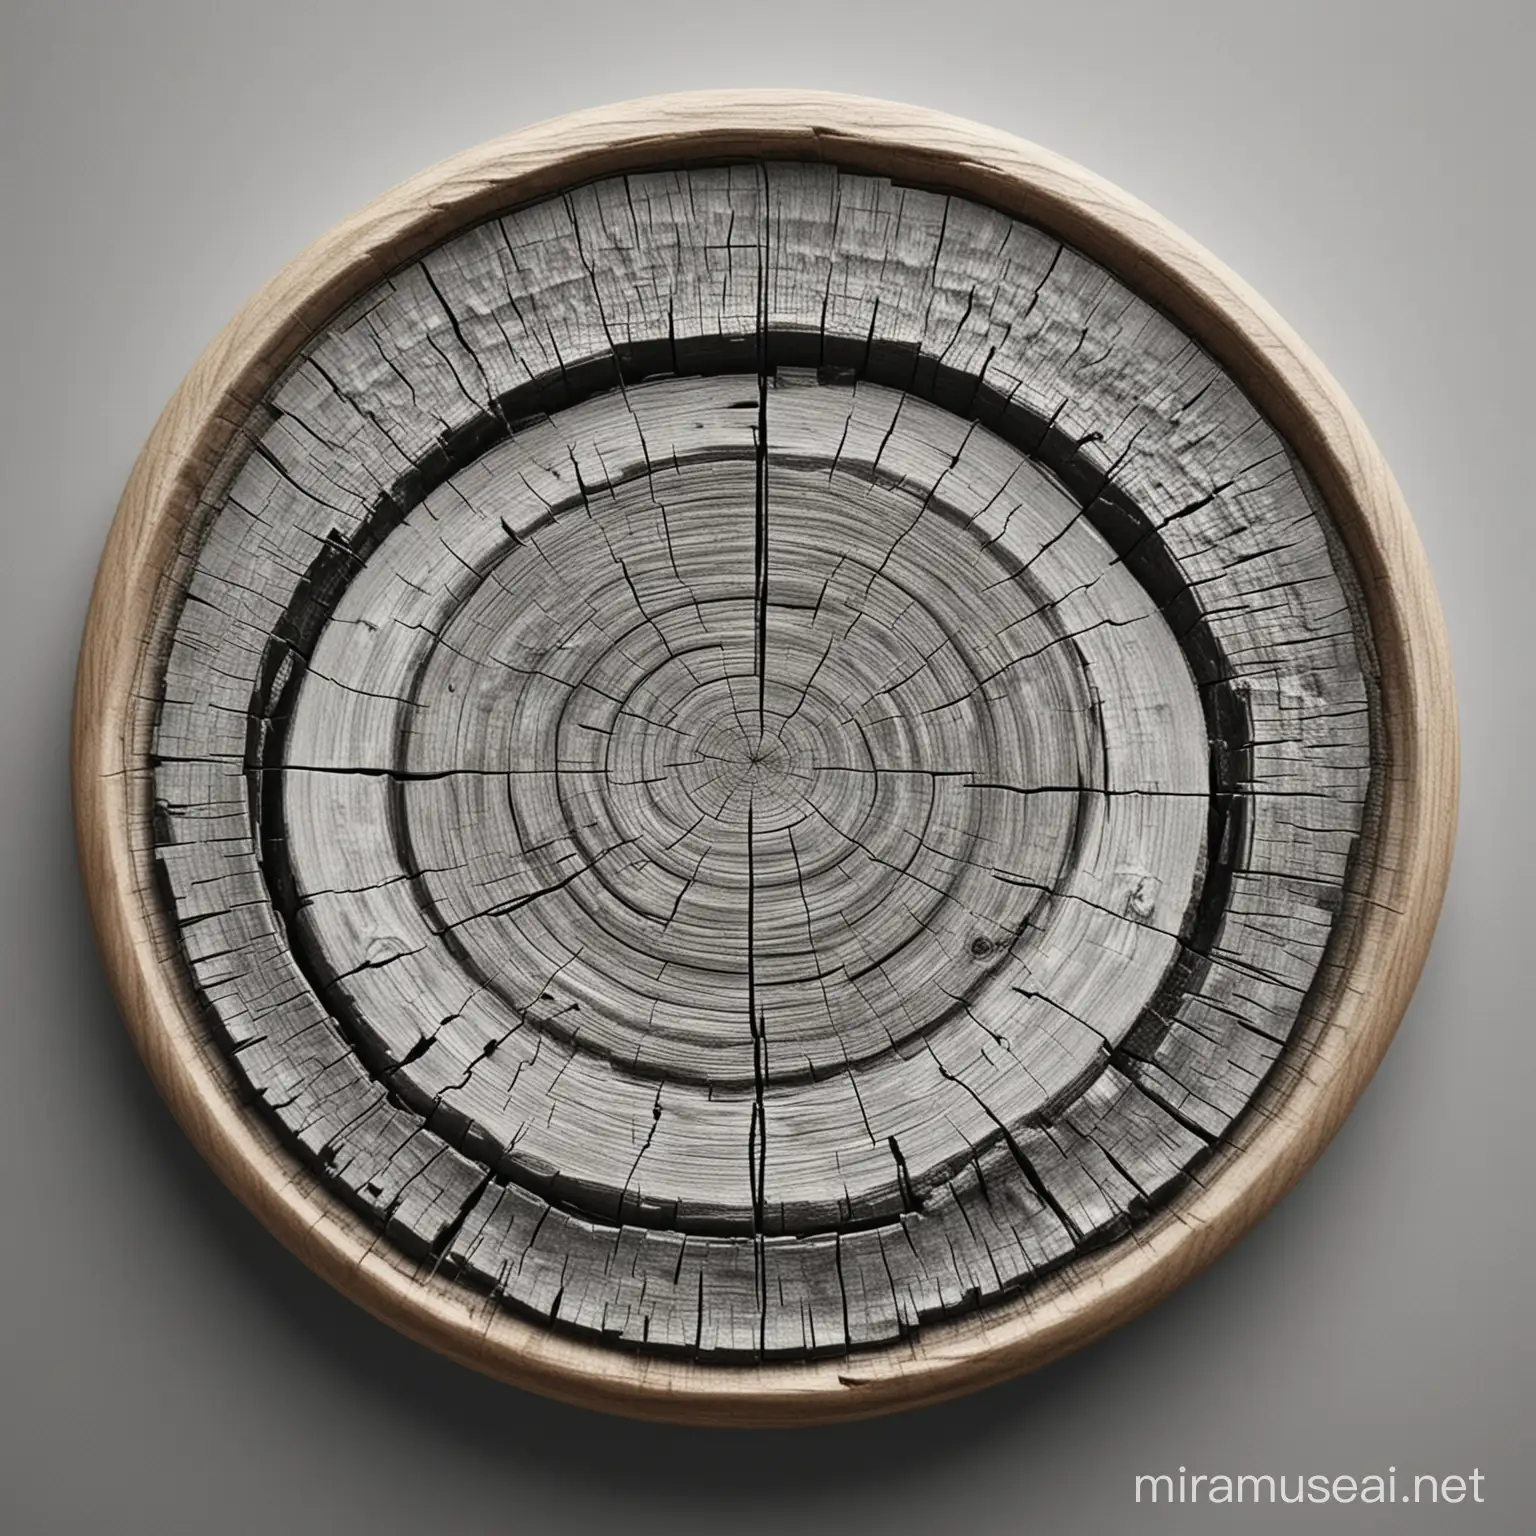 a circular cut of wood,  with the rings of growth, that i can use to input an icon. Black and white style